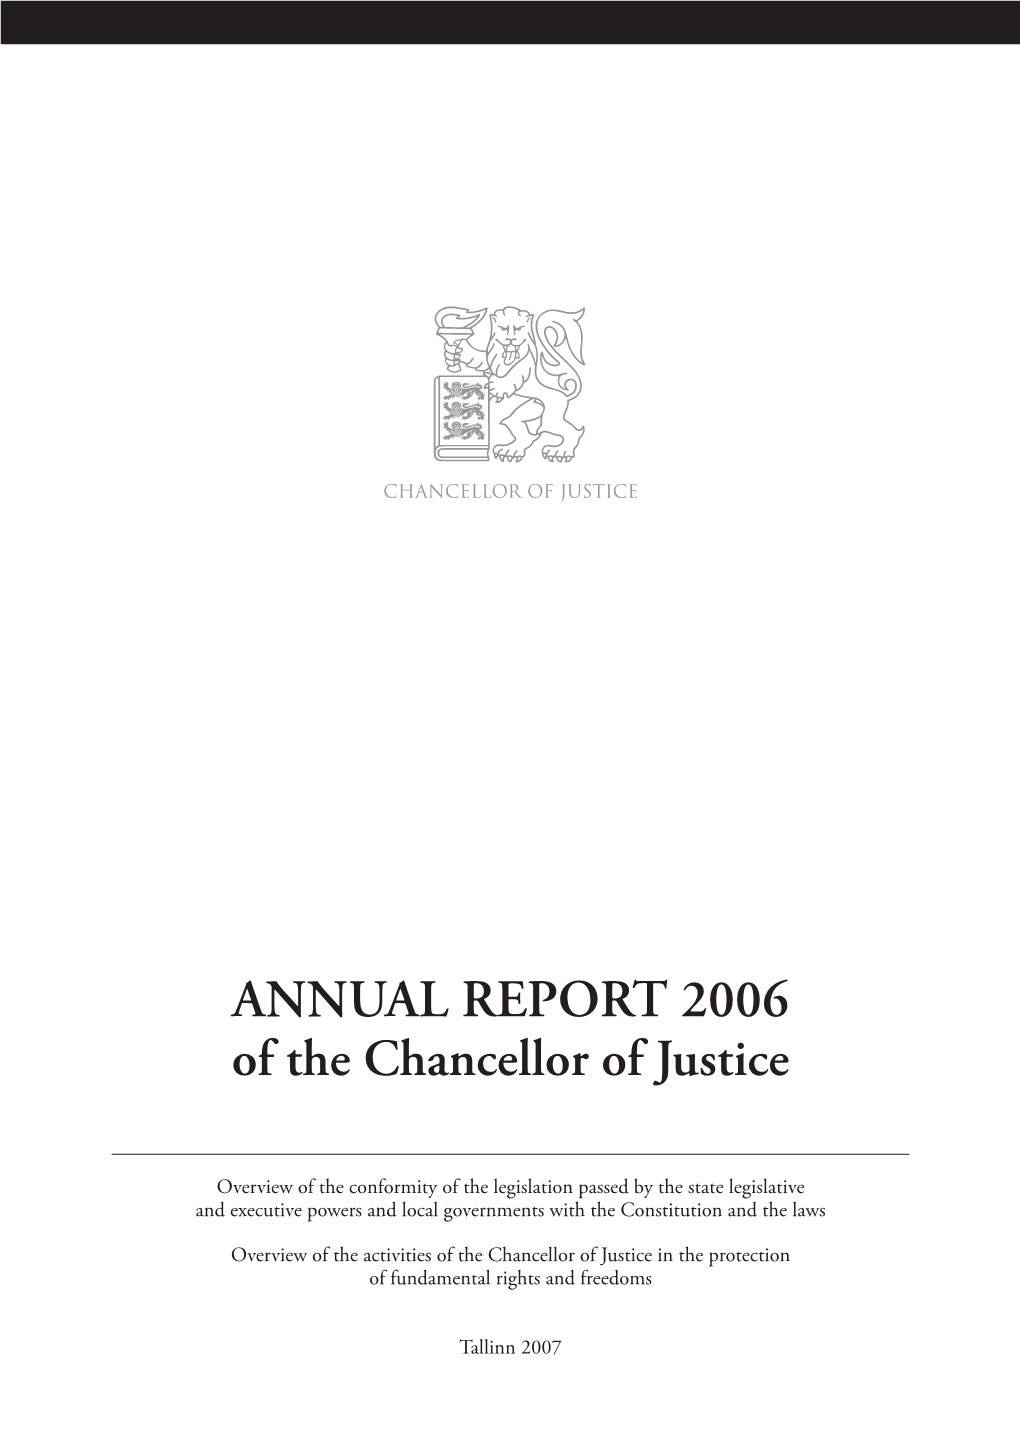 ANNUAL REPORT 2006 of the Chancellor of Justice